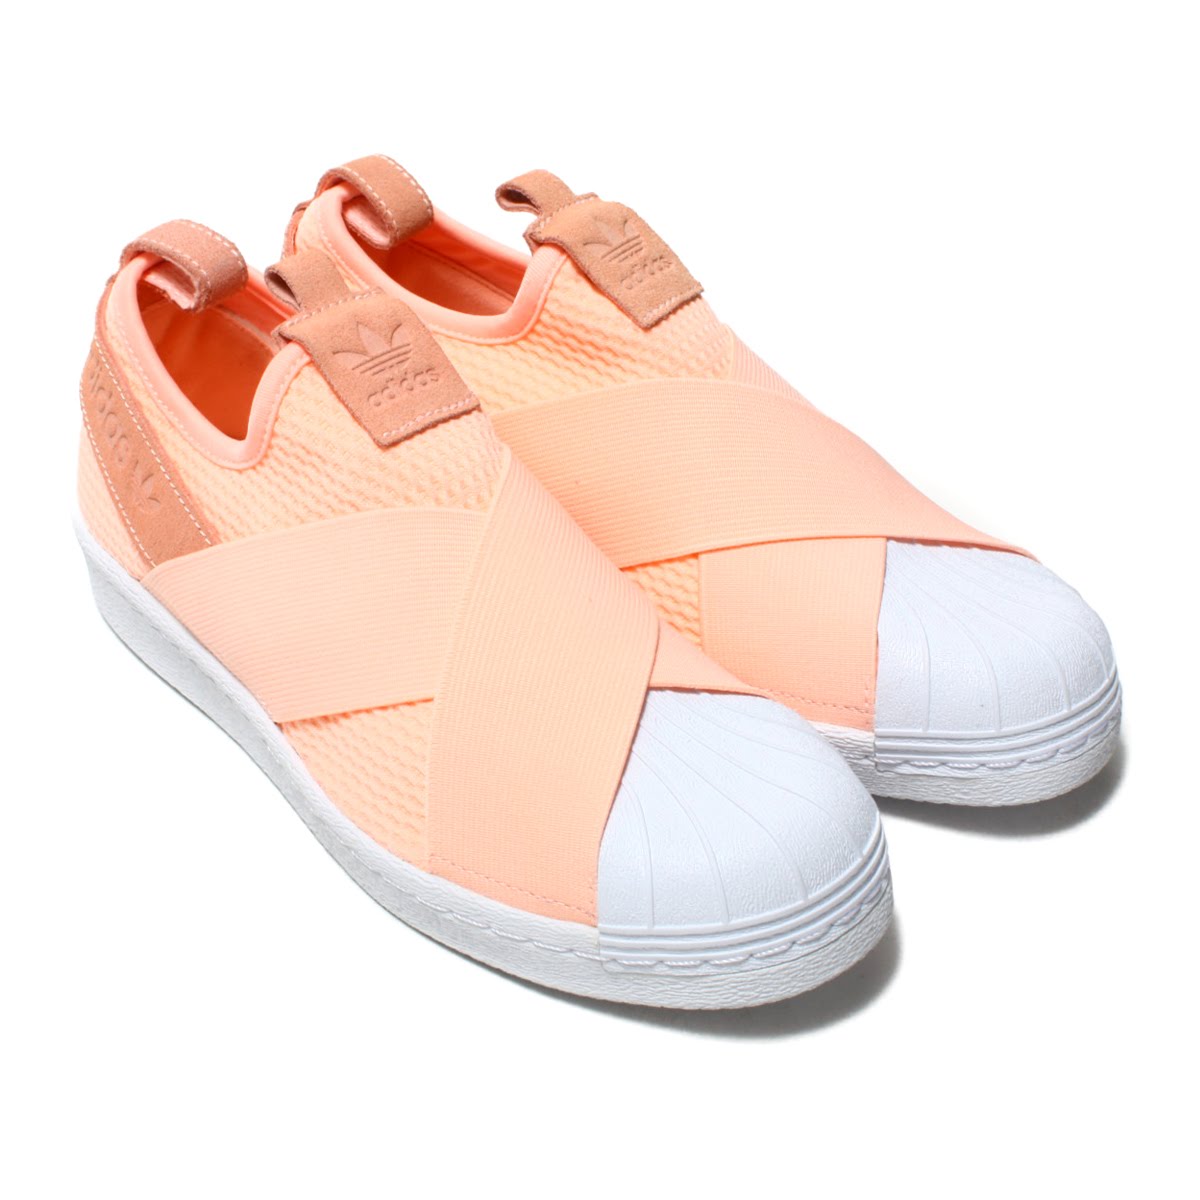 adidas pink slip on shoes